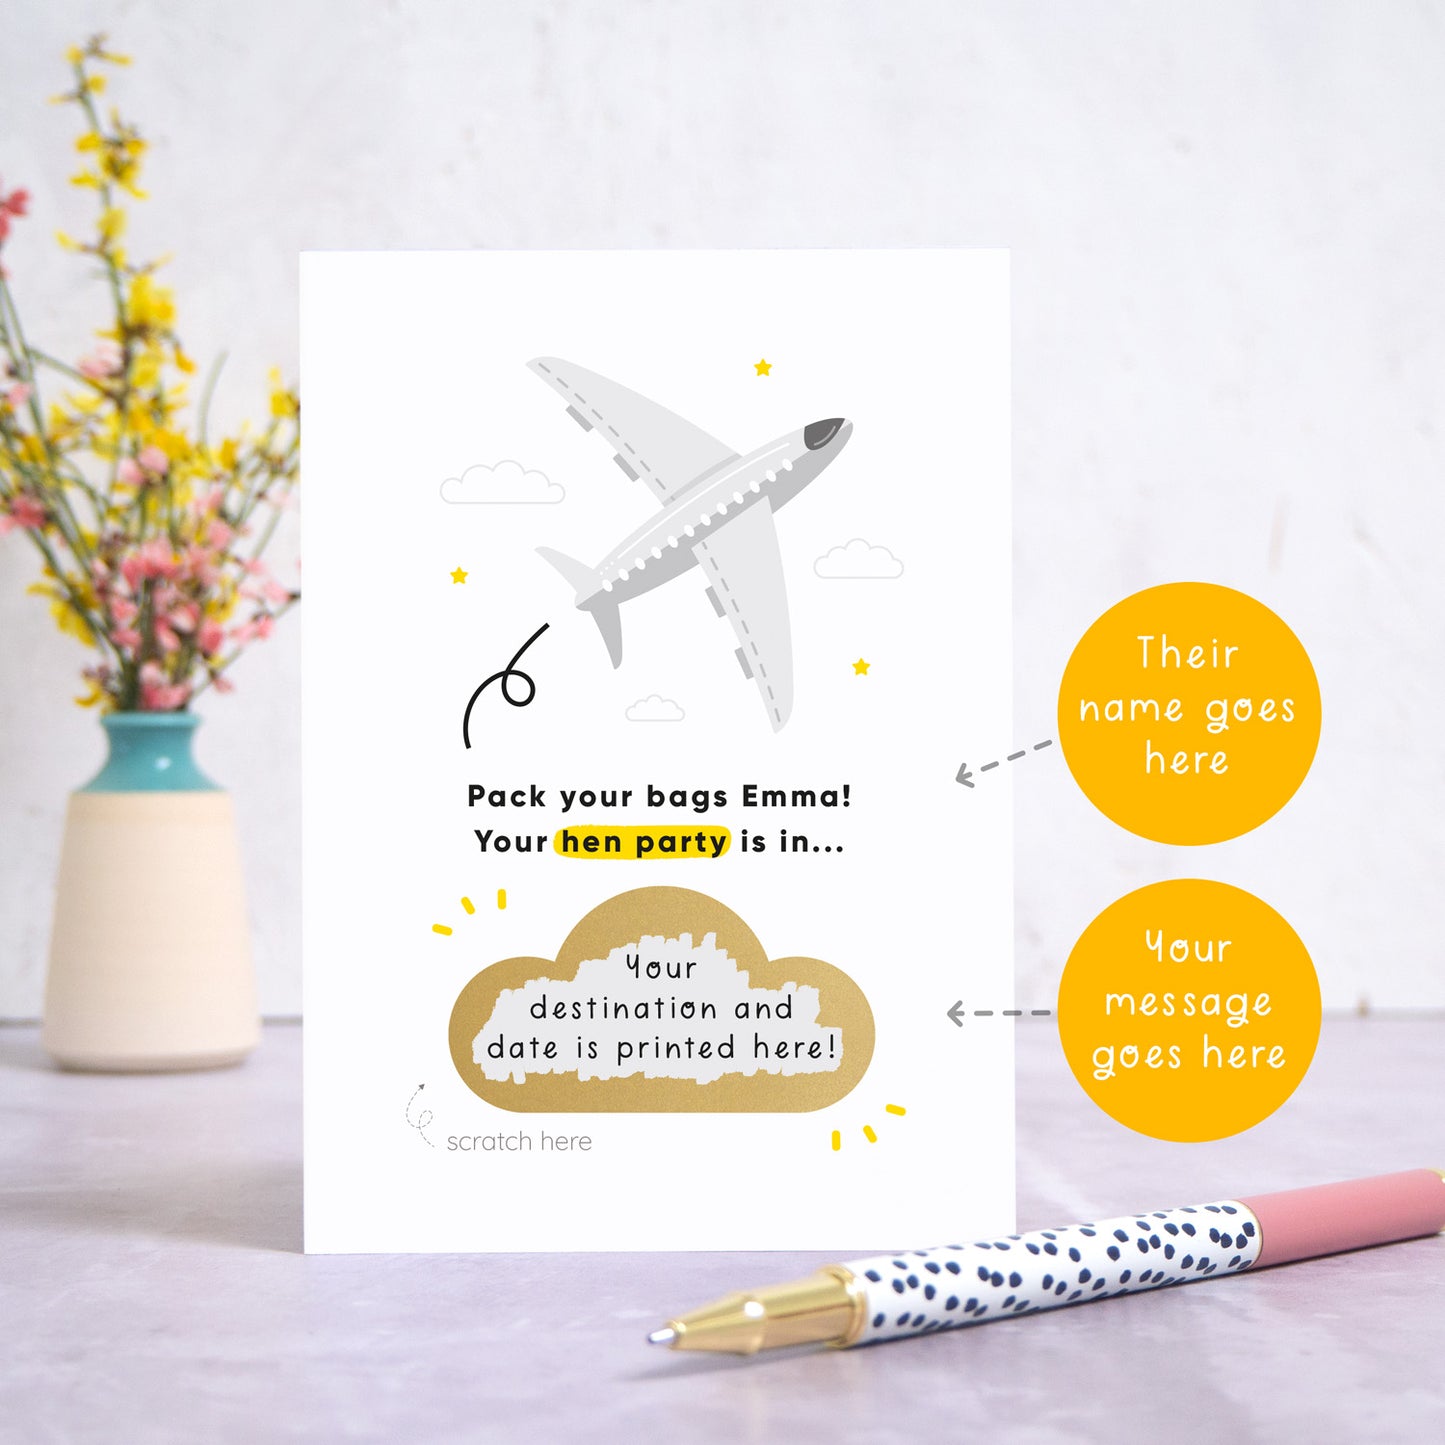 A hen party scratch and reveal card featuring a grey aeroplane and scratch off gold cloud that has been photographed stood up on a grey background with a small jar of flowers and a pen for scale. The card is surrounded by orange circles which point to the areas that can be personalised. These areas are the name and the message for under the scratch off panel.